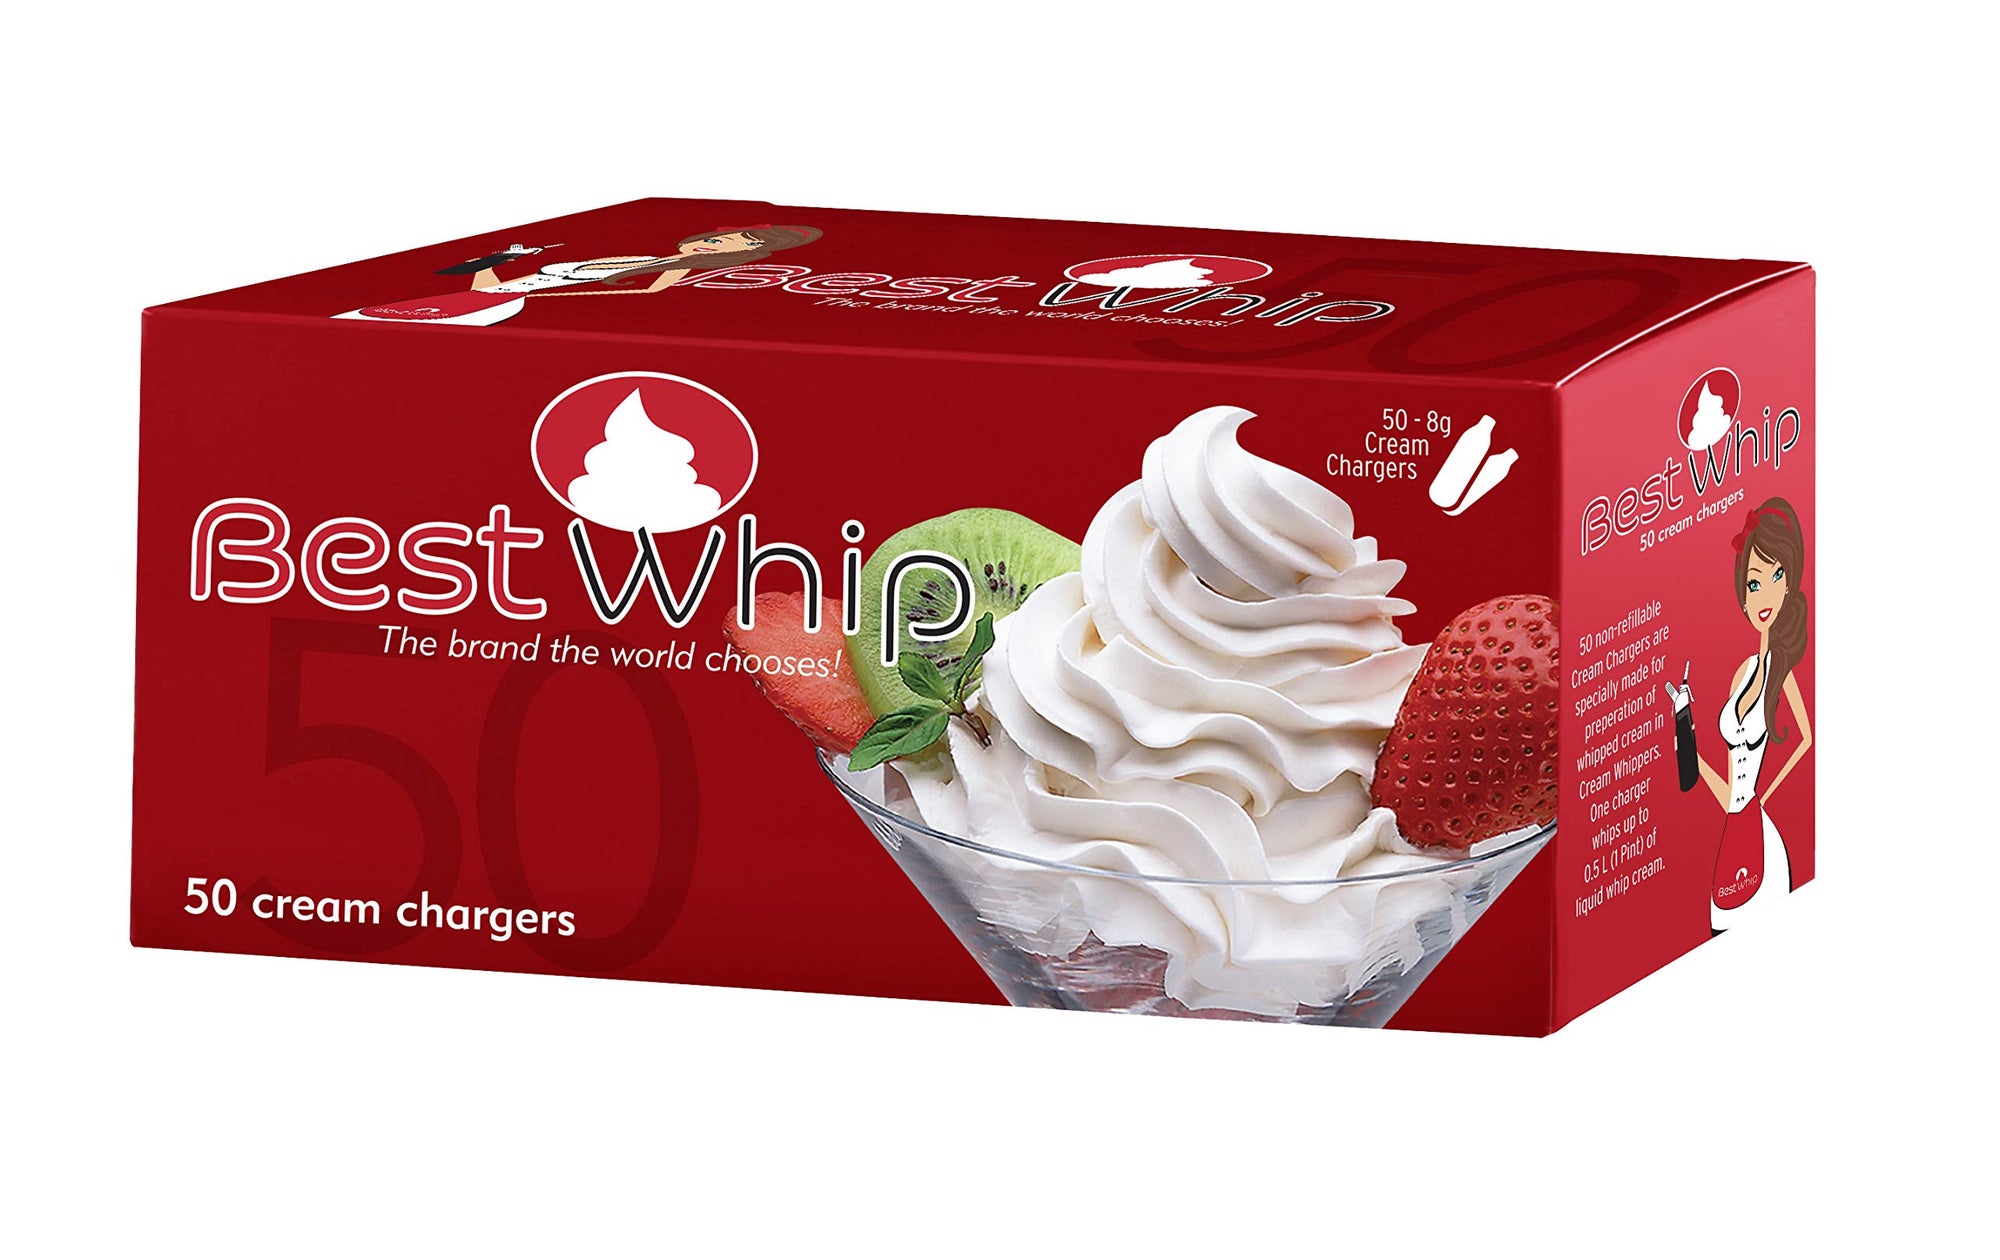 Best Whip Cream Chargers